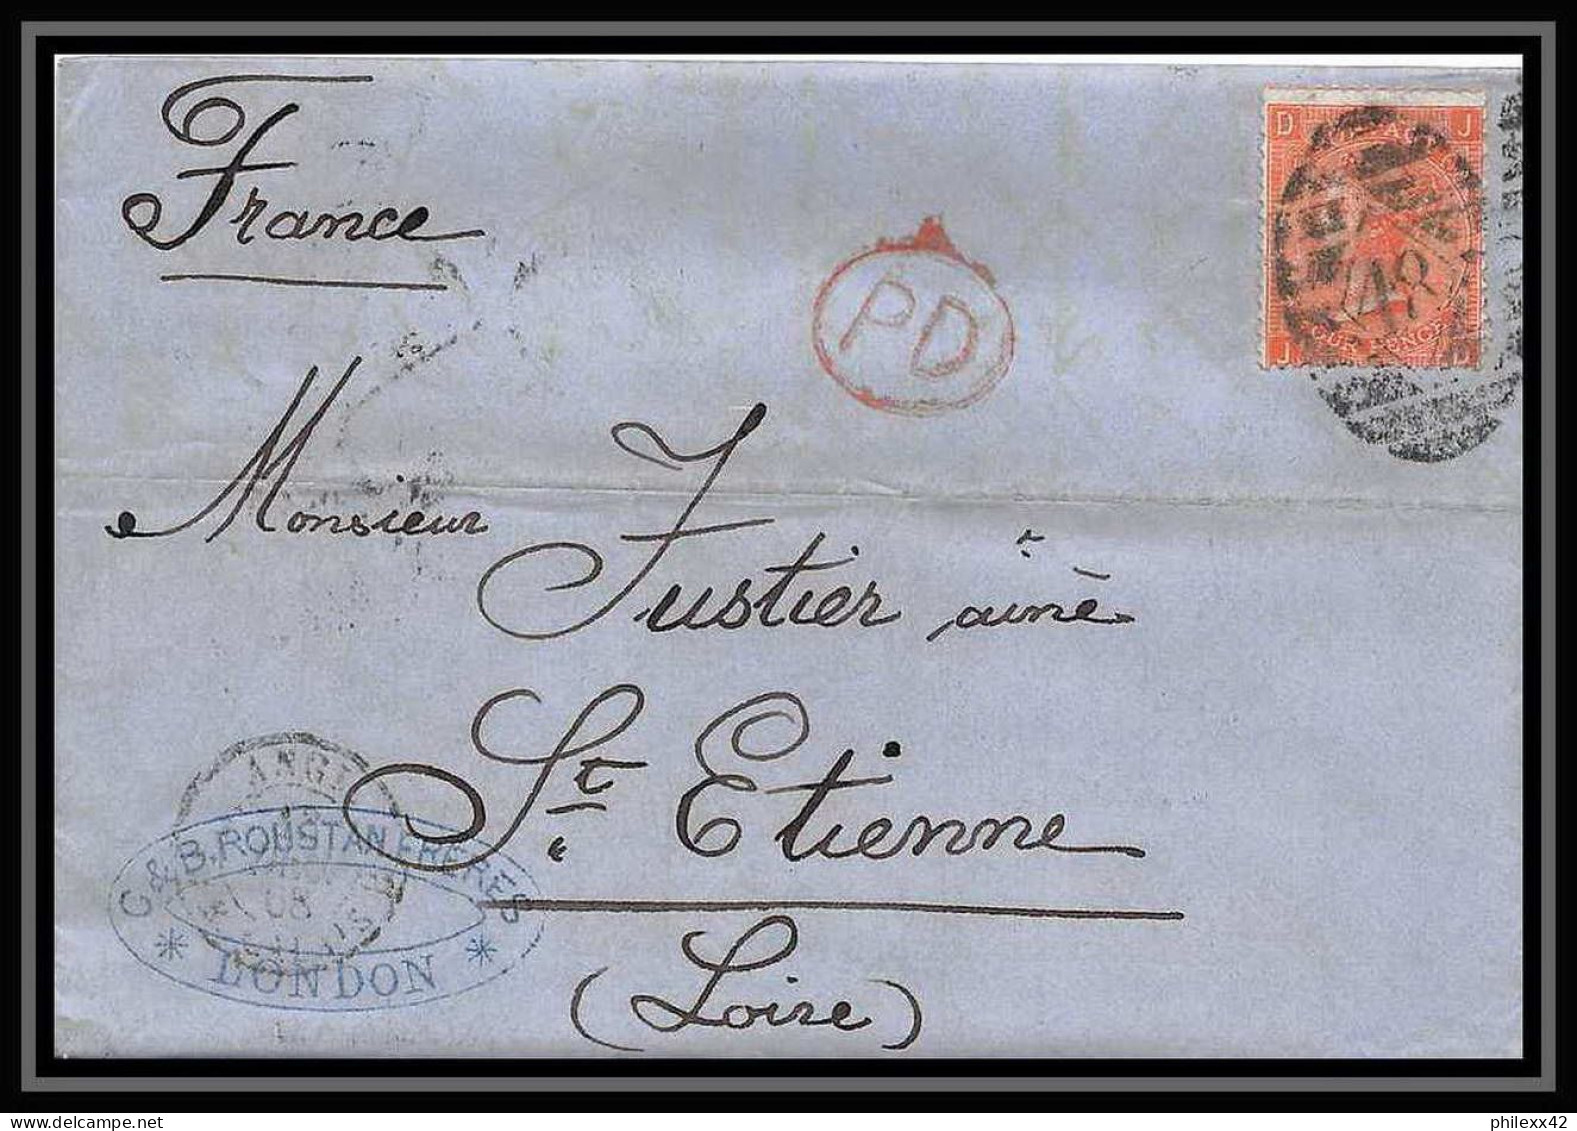 35667 N°32 Victoria 4p Red London St Etienne France 1868 Cachet 48 Lettre Cover Grande Bretagne England - Covers & Documents